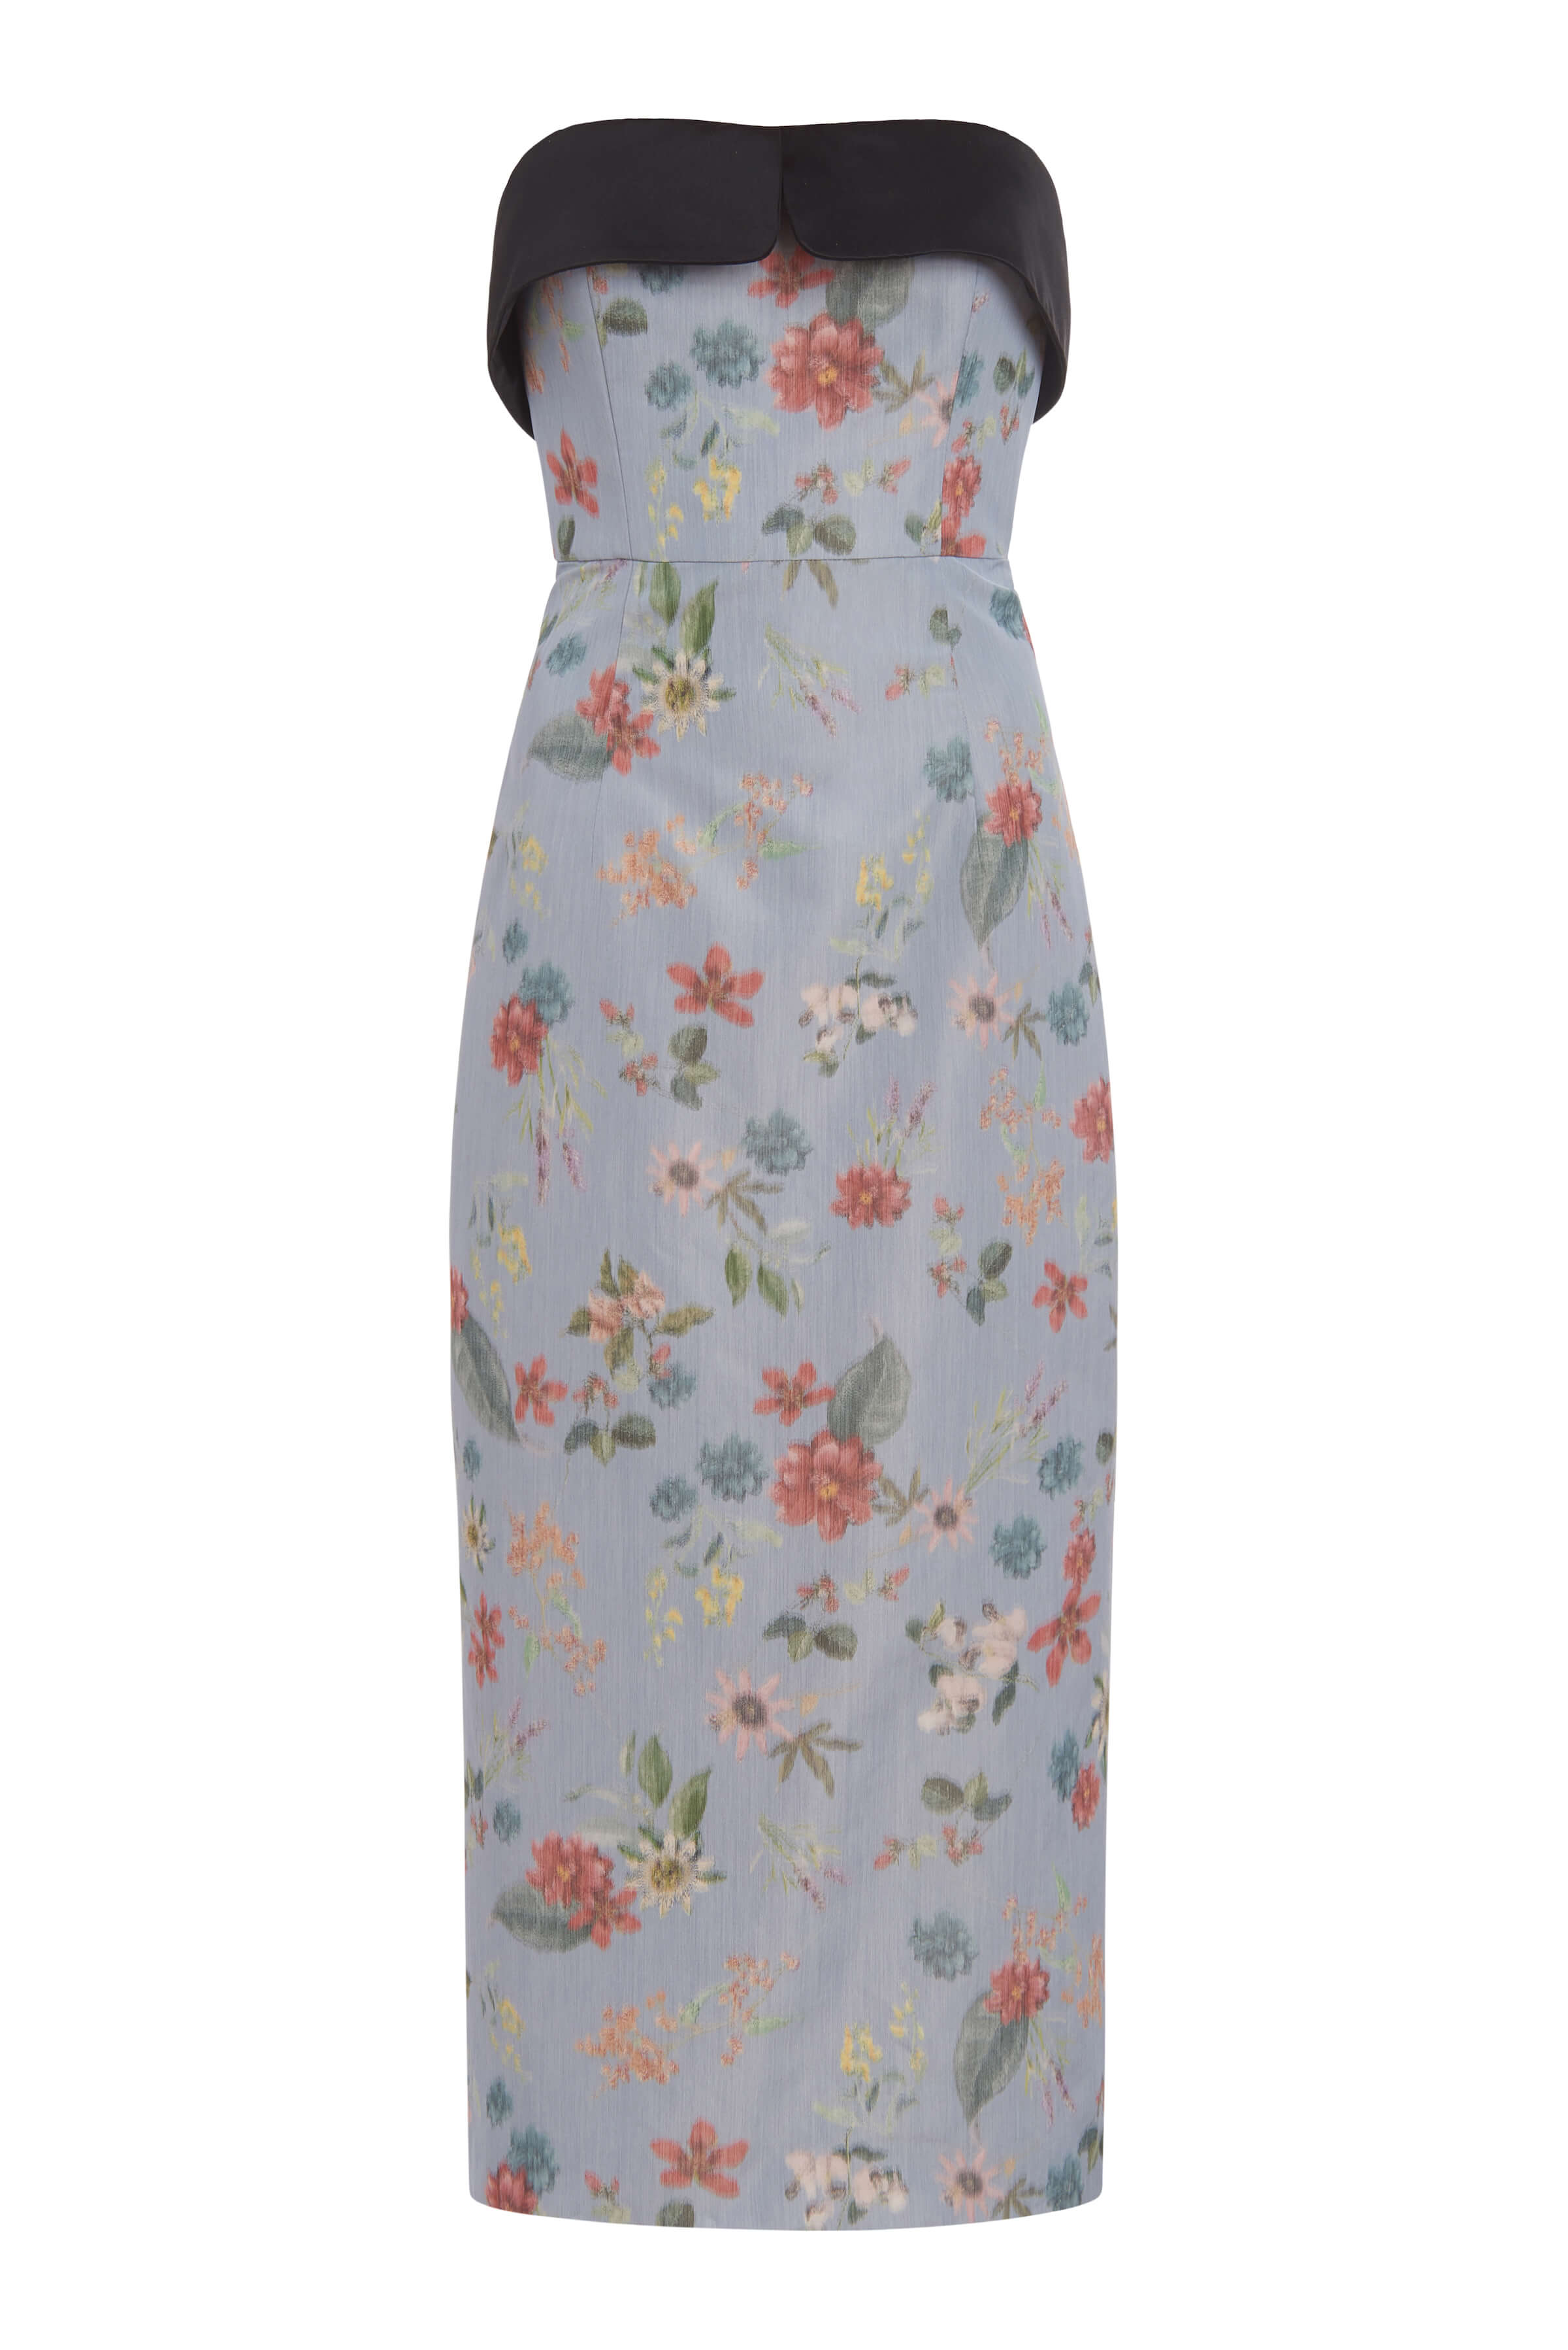 Alondra Strapless Dusty Blue Floral Ikat Column Dress With Contrasting Neckline